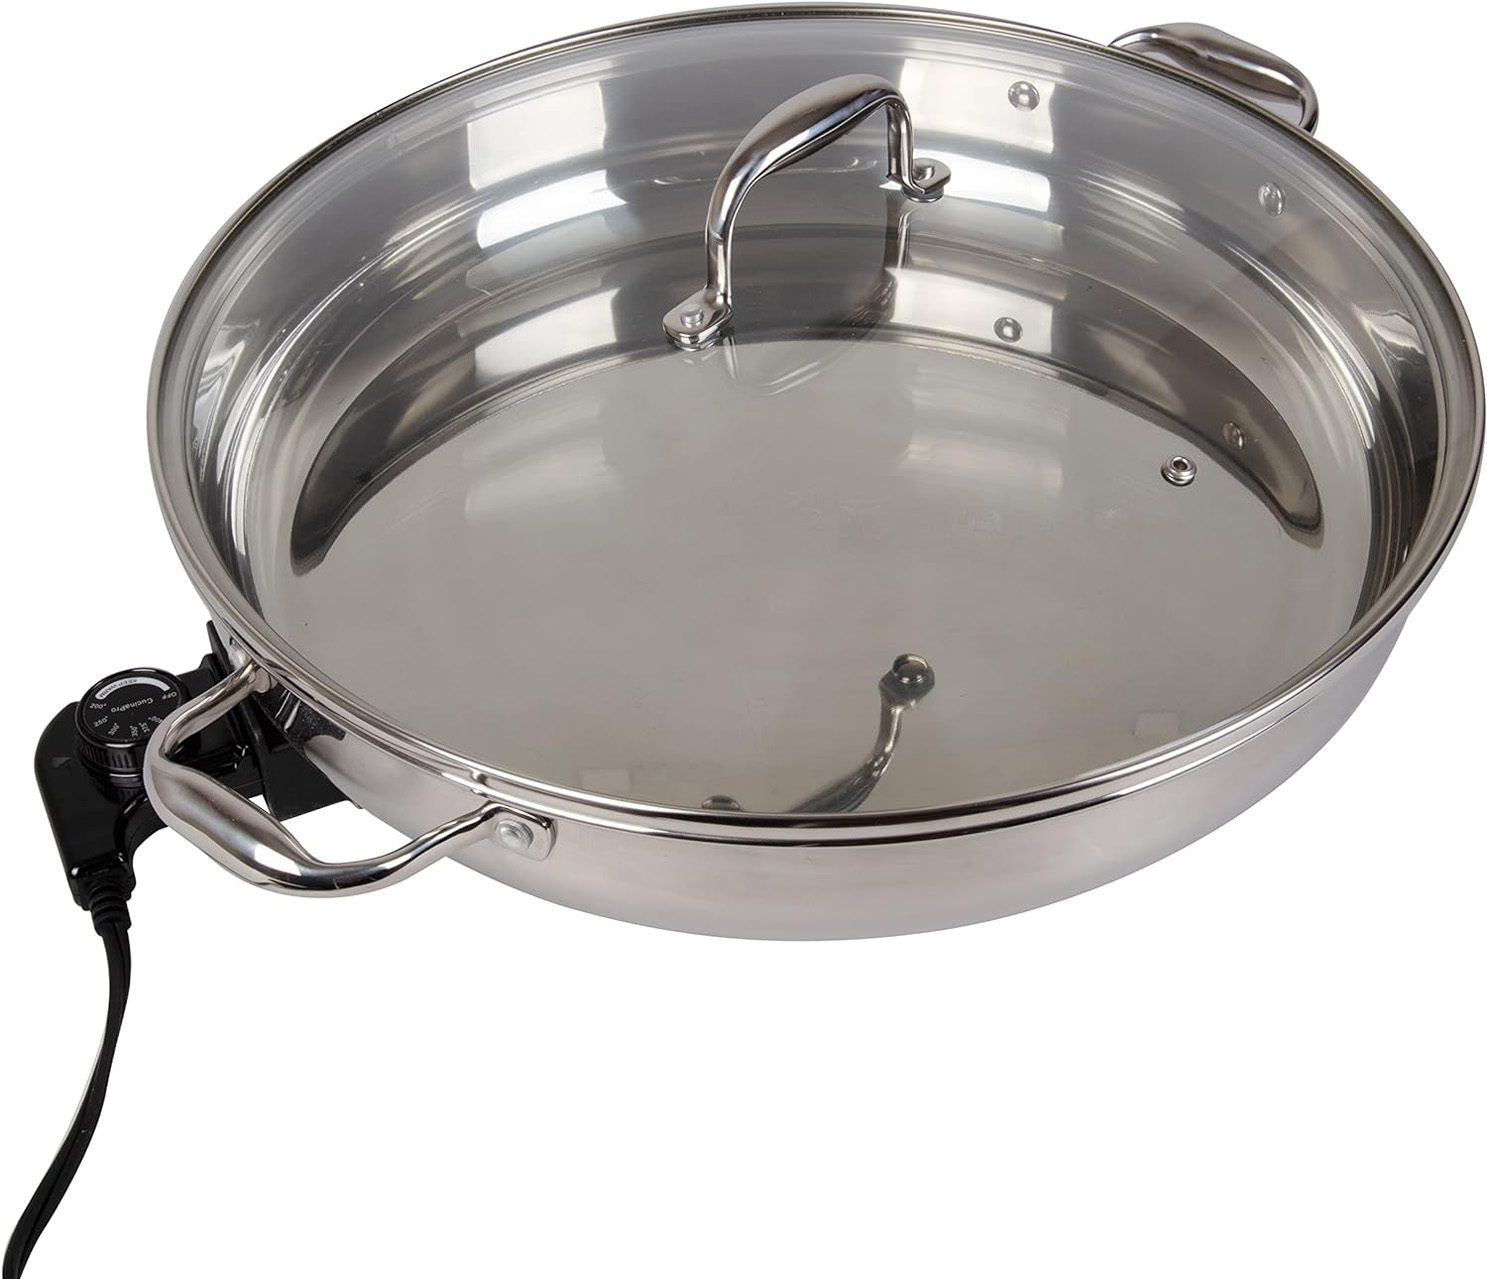 Electric Skillet By Cucina Pro – 1810 Stainless Steel Frying Pan